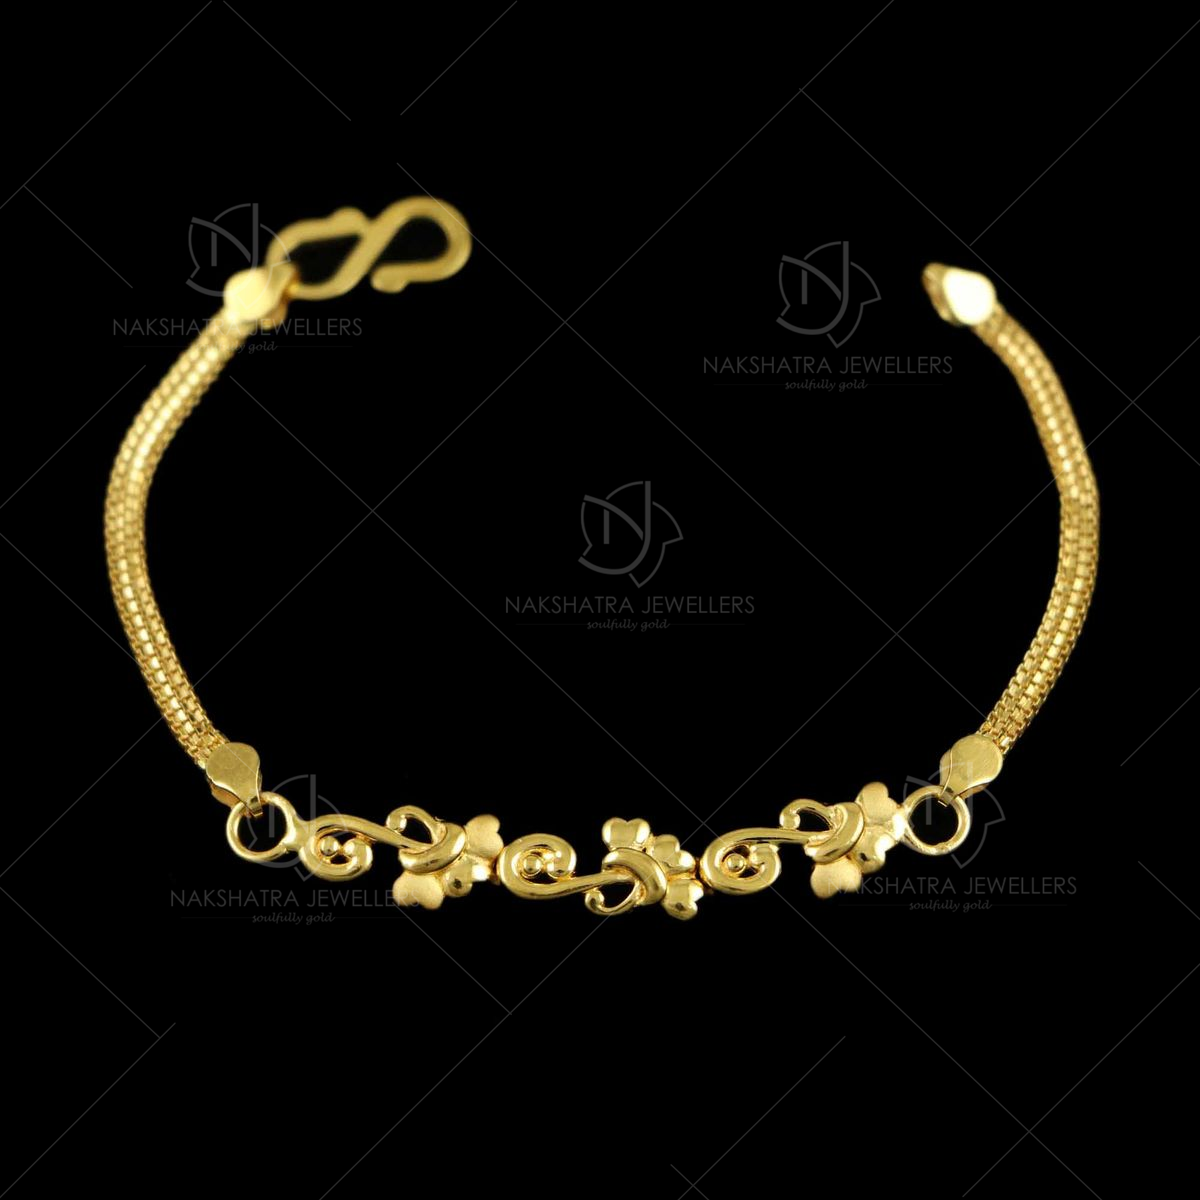 Buy Personalized Baby Name Bracelet in 16K Gold at Petite Boutique